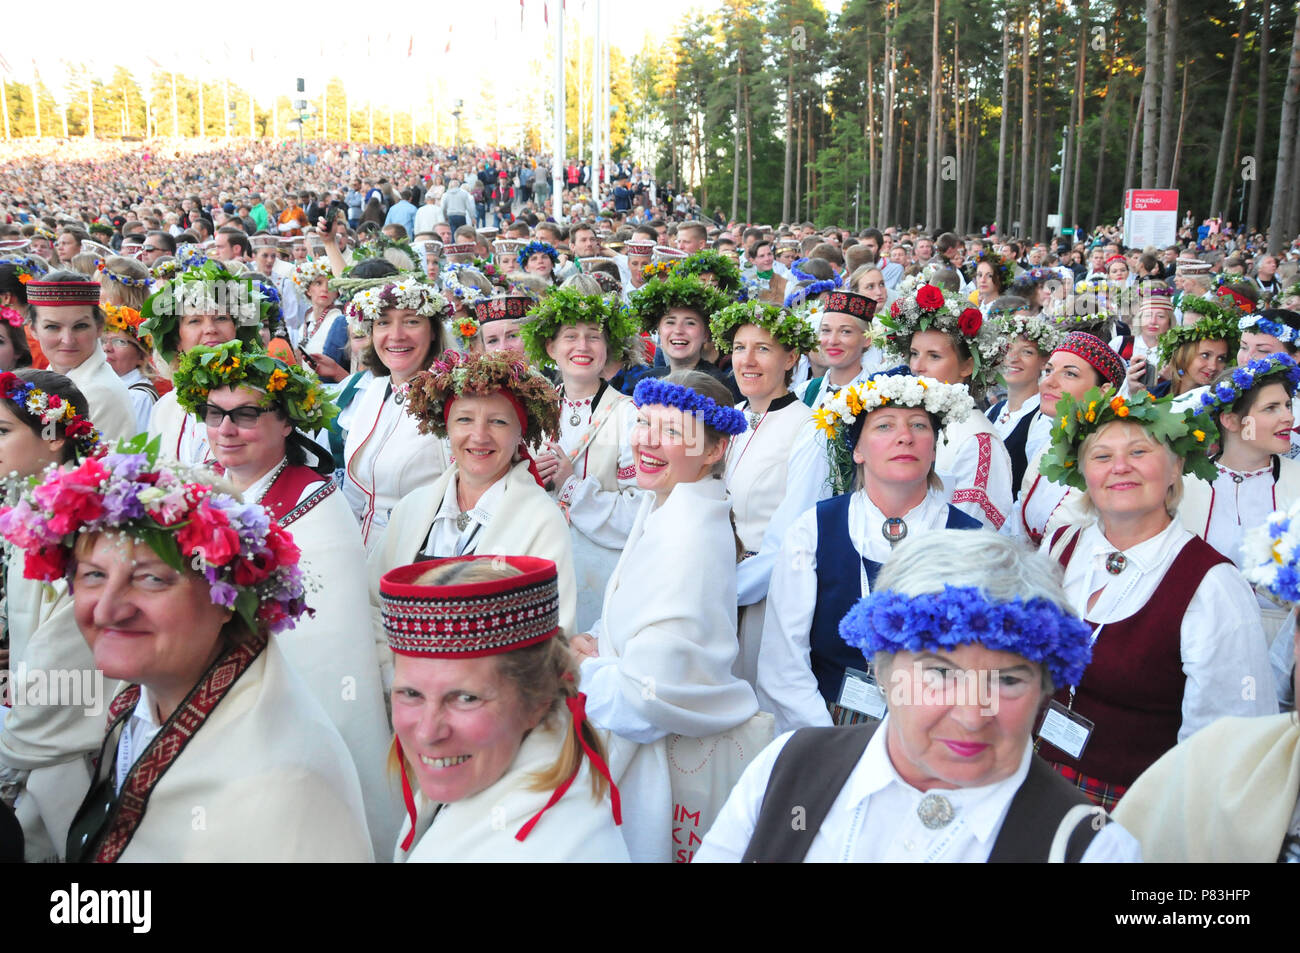 Riga, Latvia. 8th July, 2018. Singers in national costumes are seen before the closing concert of Latvia's XXVI Nationwide Song and XVI Dance Celebration in Riga, Latvia, on July 8, 2018. This concert concluded the week-long national song and dance celebration in which about 43,000 dancers and singers from Latvia and abroad participated. Credit: Janis/Xinhua/Alamy Live News Stock Photo